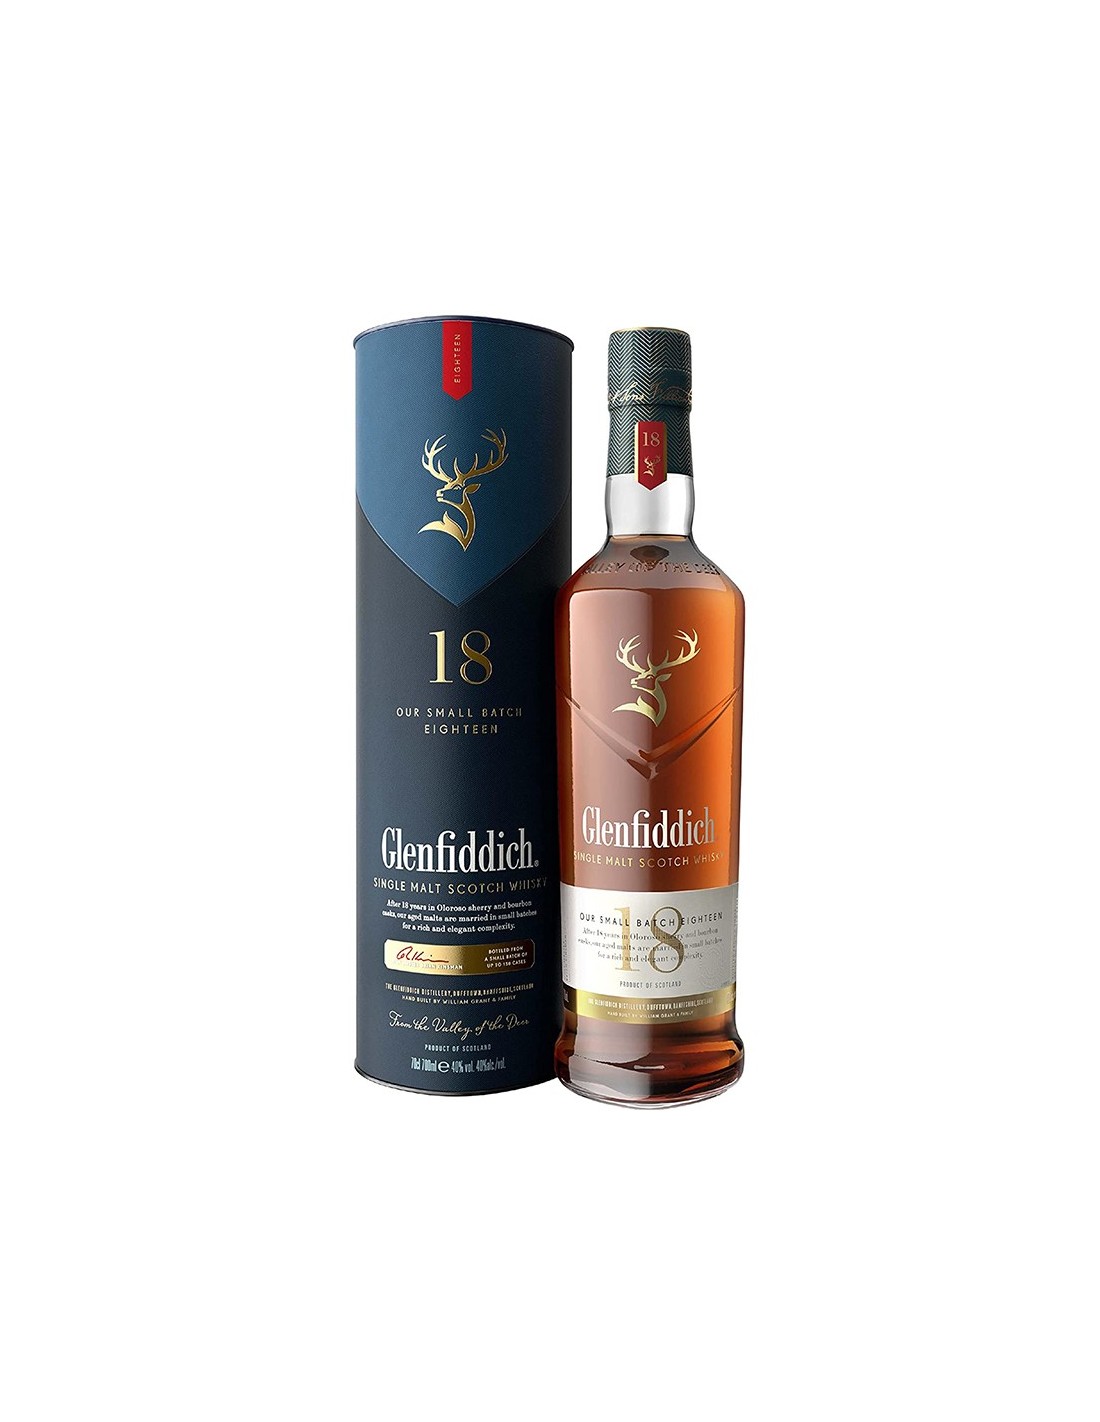 Glenfiddich 18 Year Old Whisky